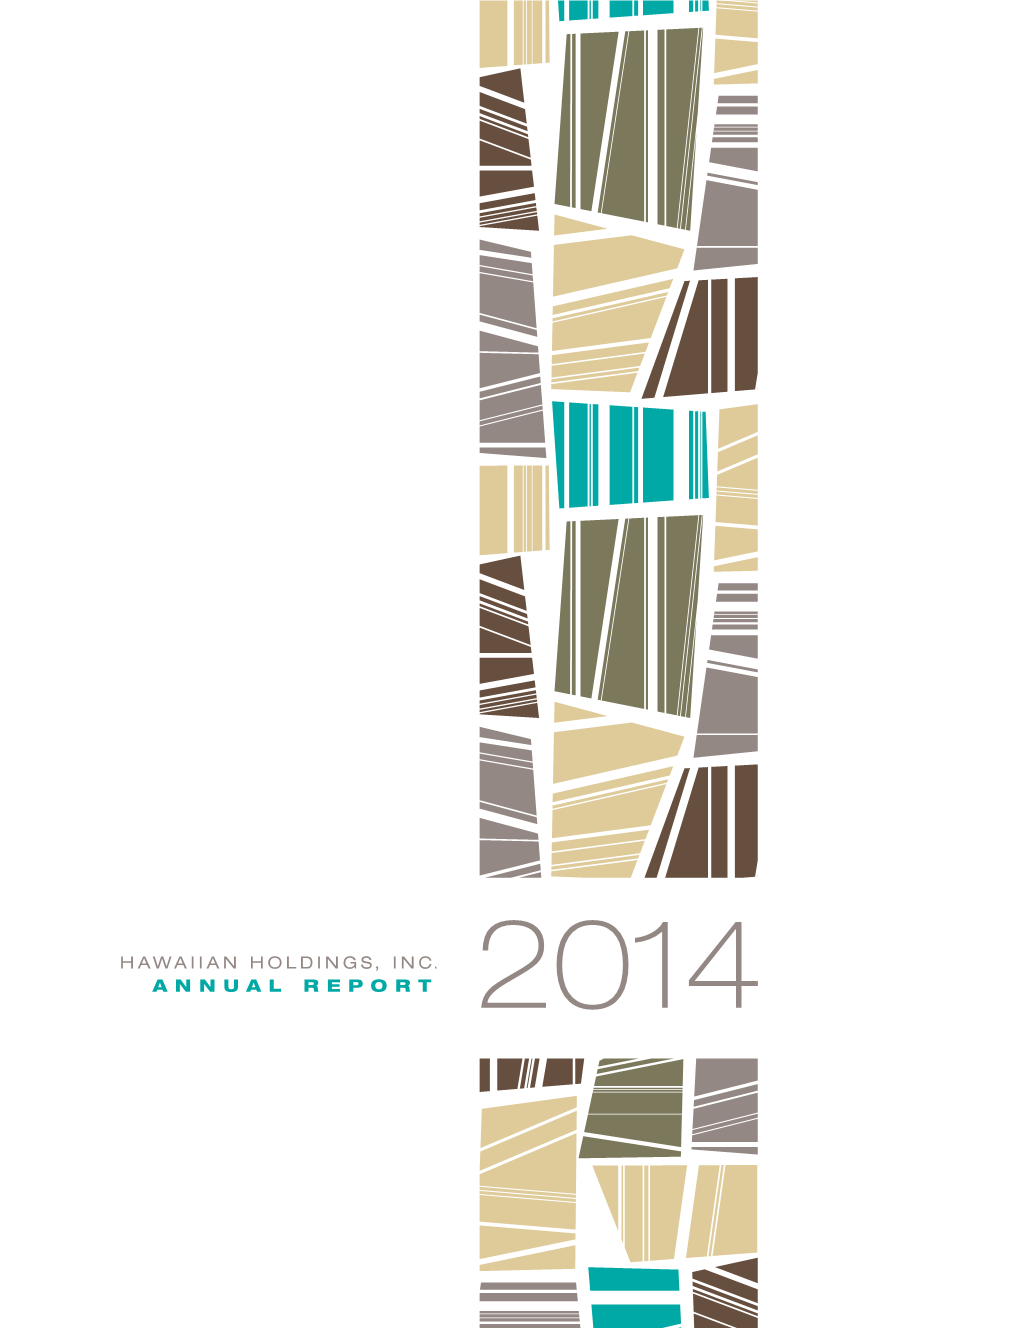 2014 Annual Report BLEED: 0.125” COLOR: 4C Cover (Outside Panels) SIZE: 16.5”W X 10.75”H DATE: February 2015 FOLDS TO: 8.25” X 10.75”